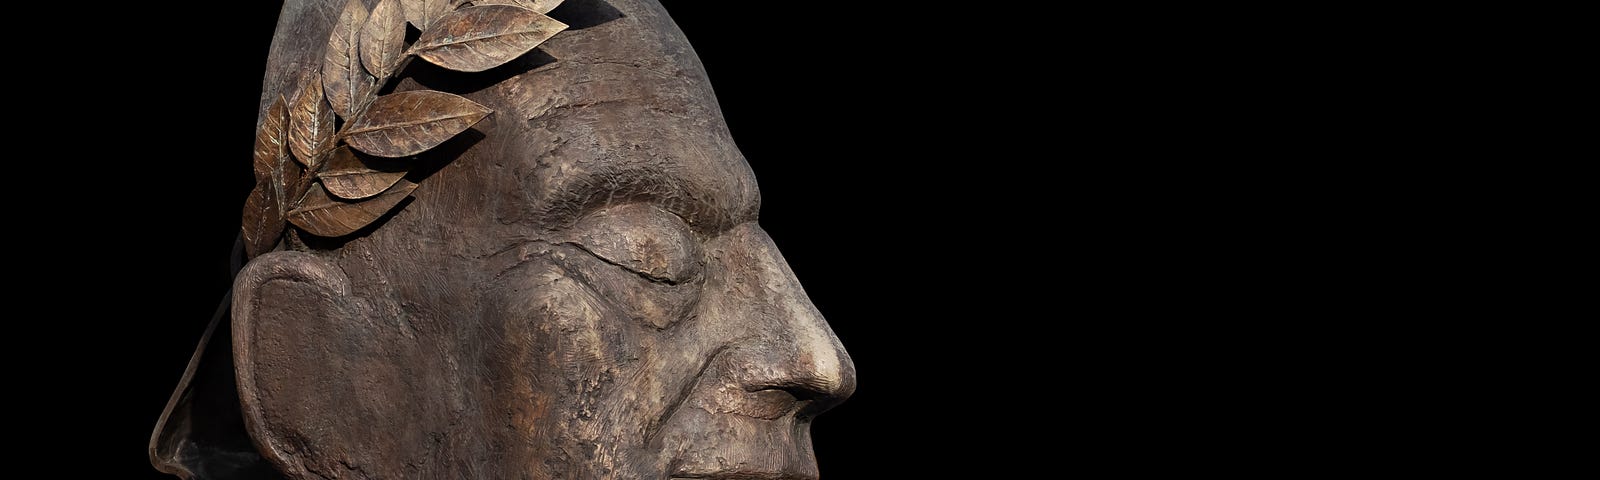 Stone sculpture of the face and neck of Julius Caesar, seen in profile. Black background.